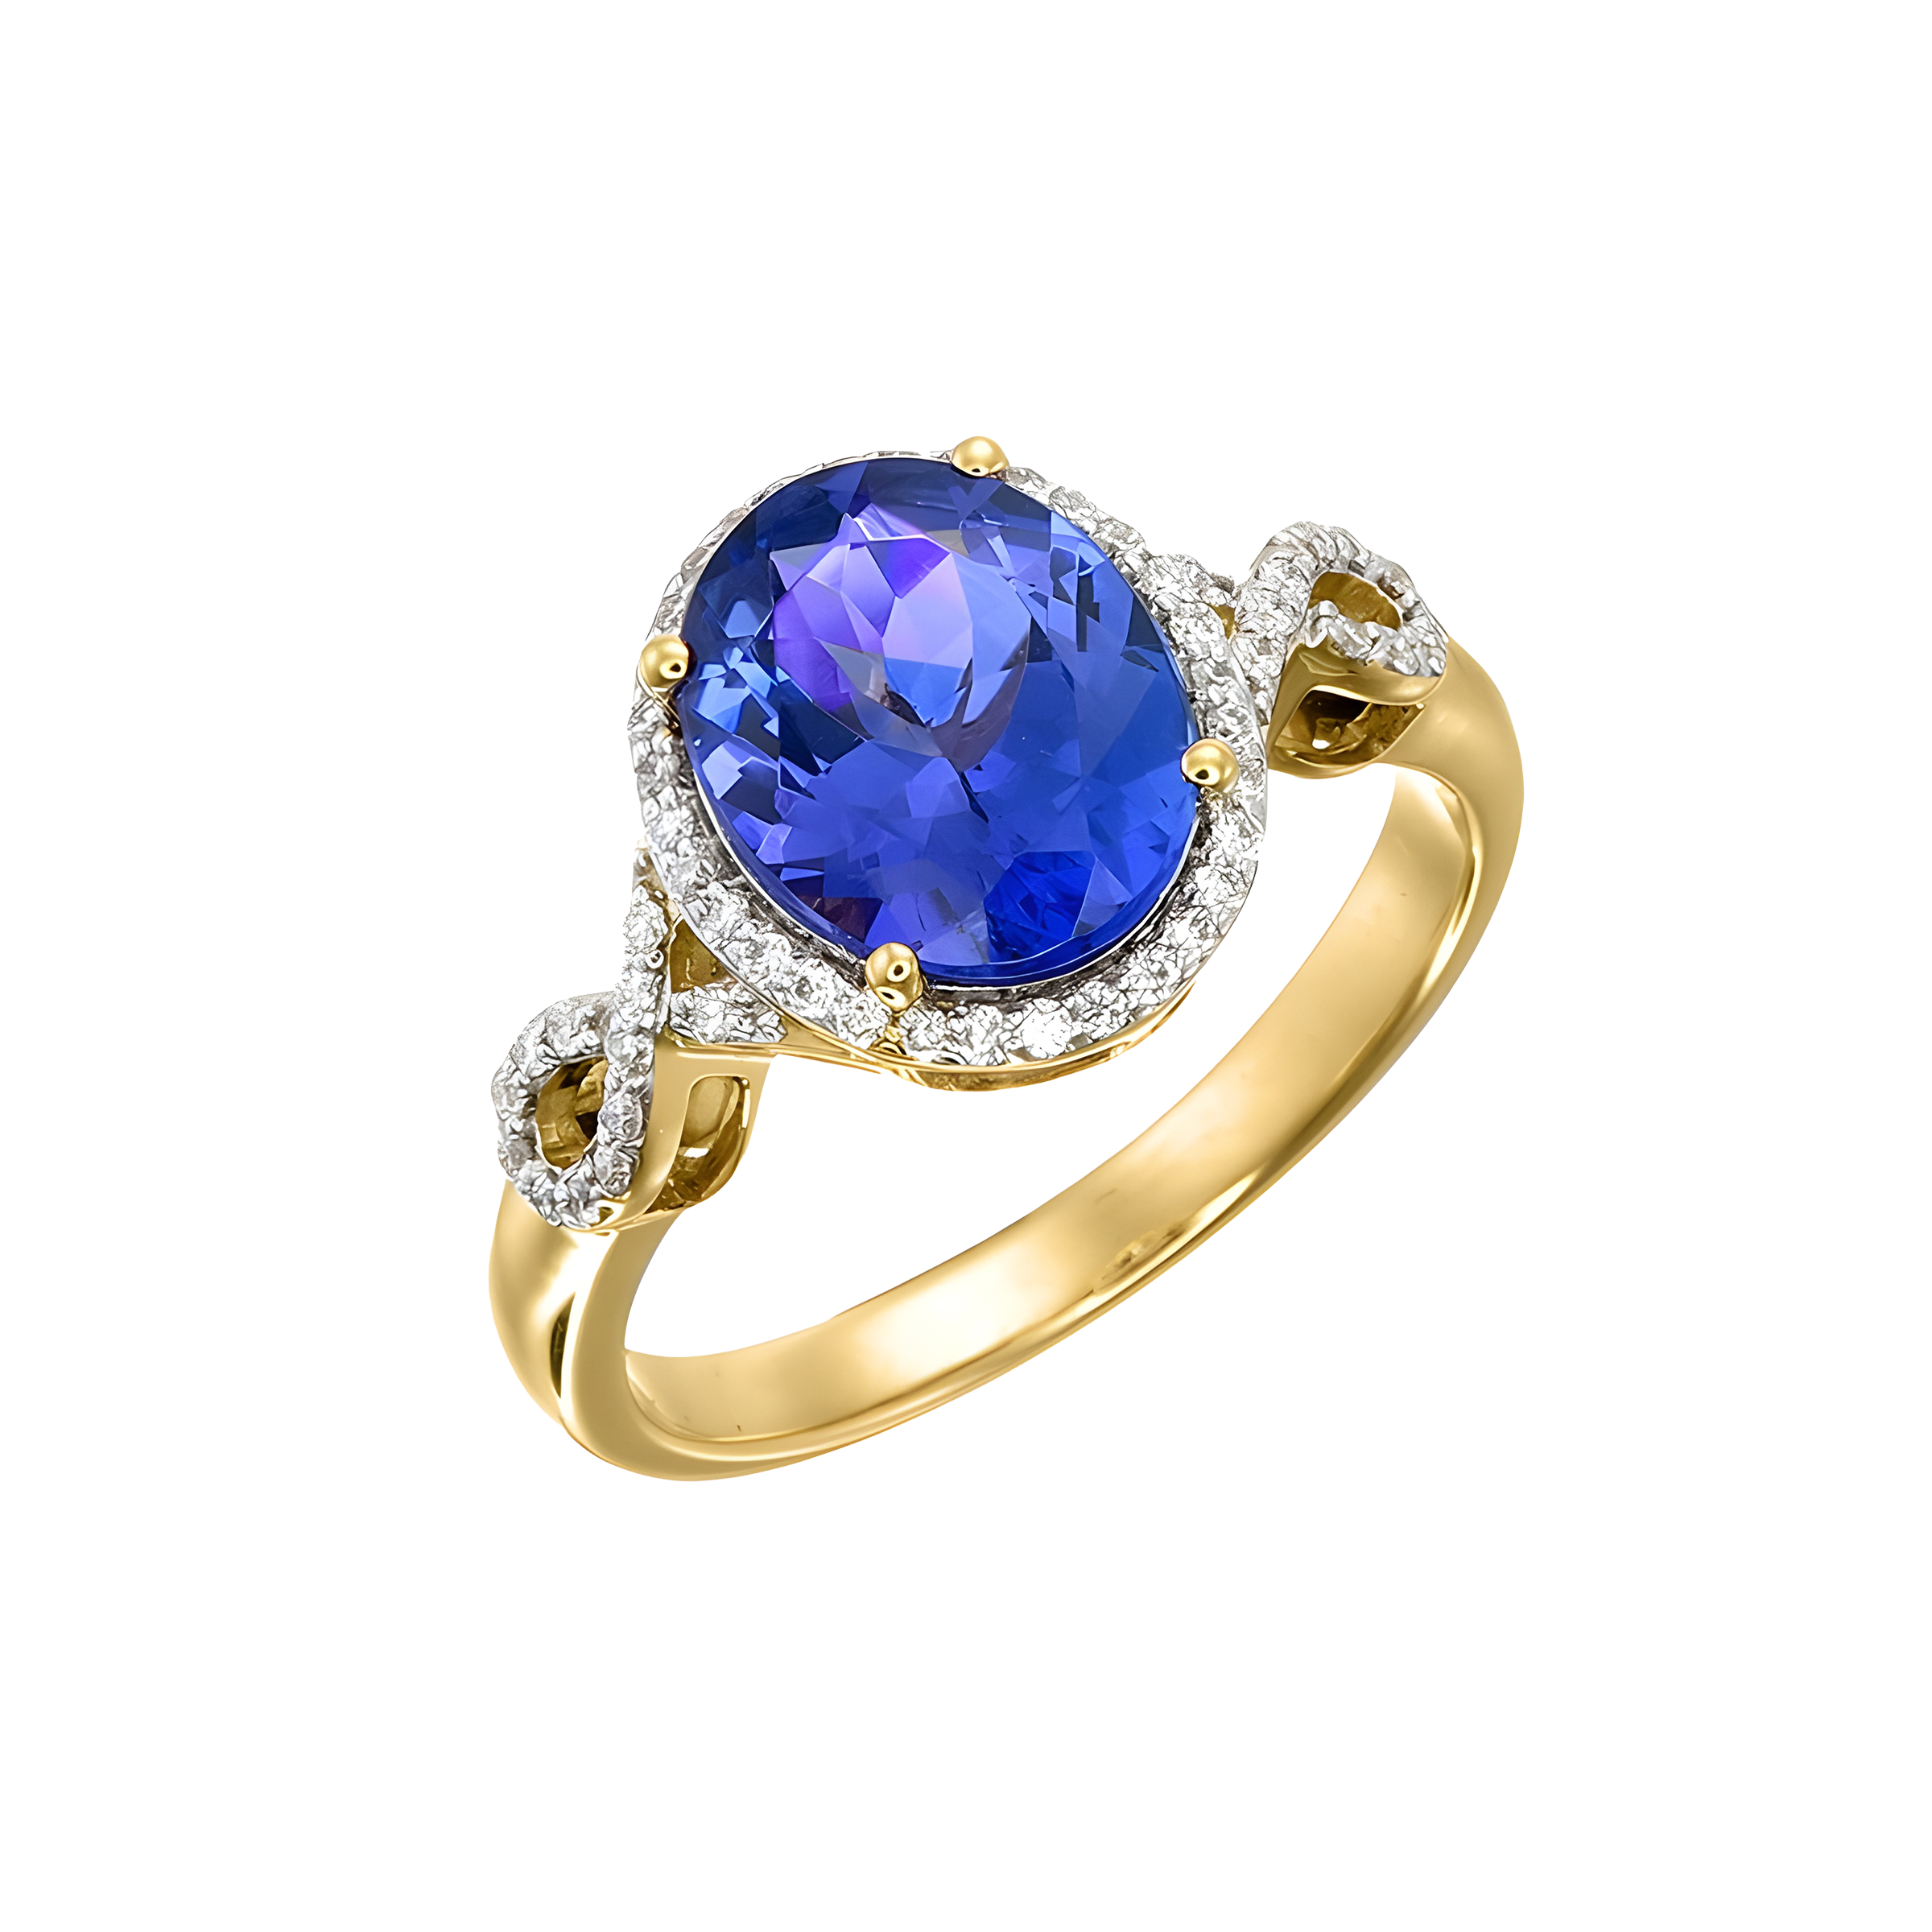 Oval Tanzanite and Diamond Ring in 18K Yellow Gold